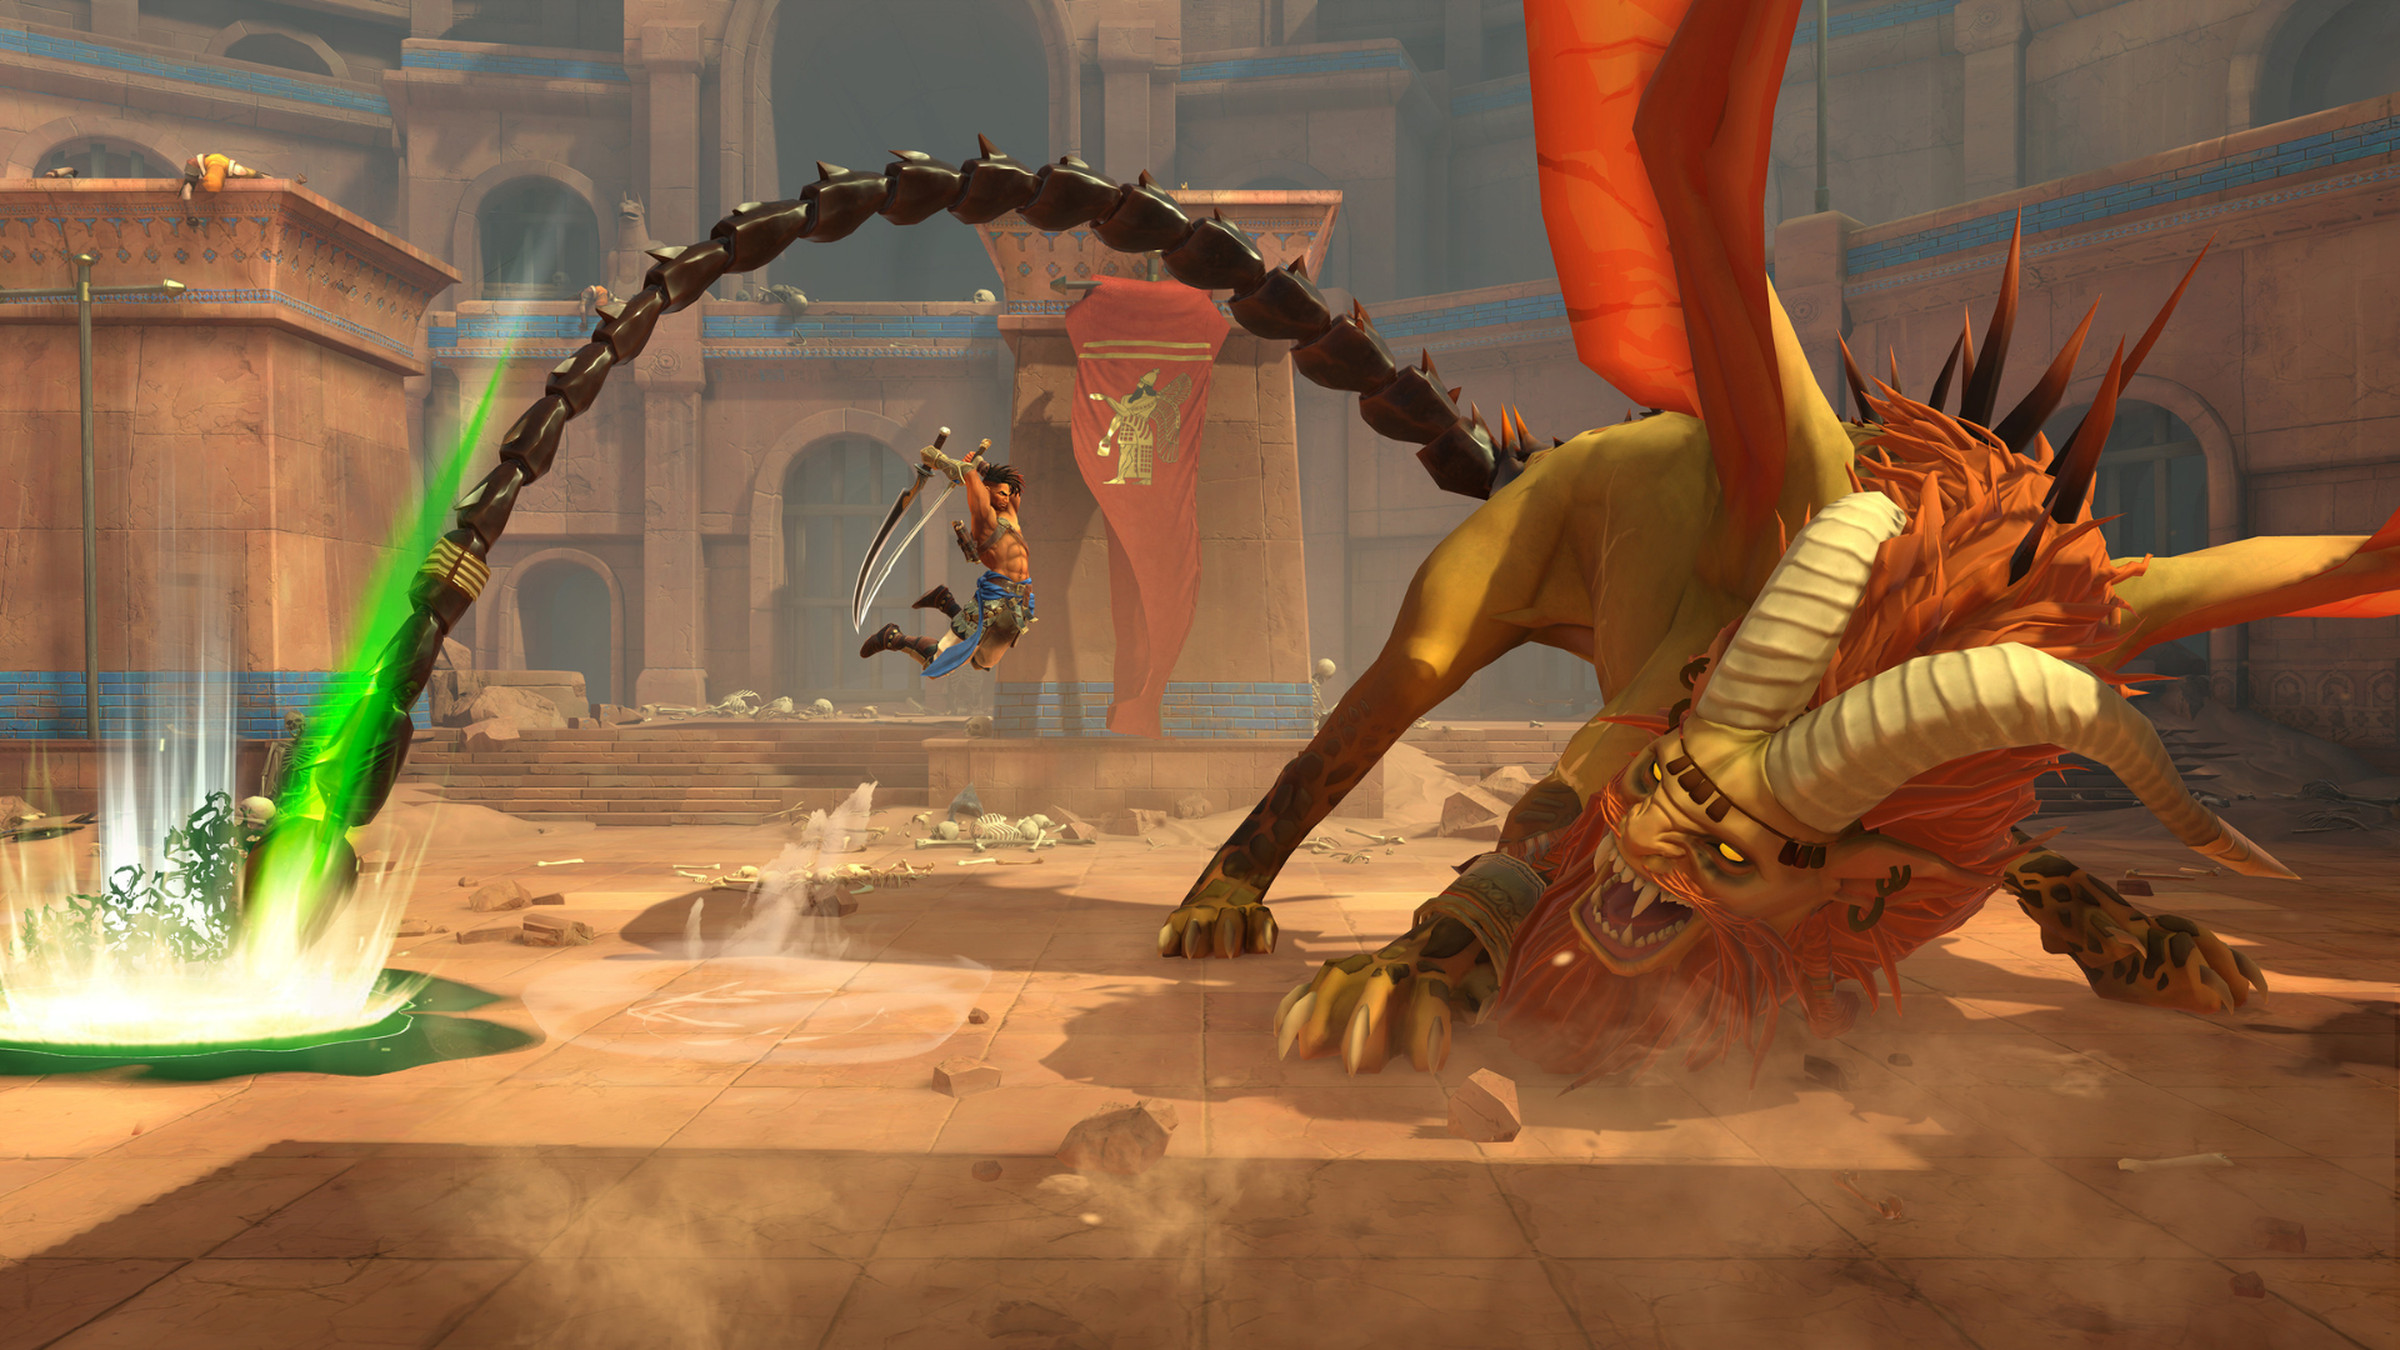 screenshot from Prince of Persia: The Lost Crown featuring the main character Sargon attacking a large manticore enemy from the air in a large coliseum arena.